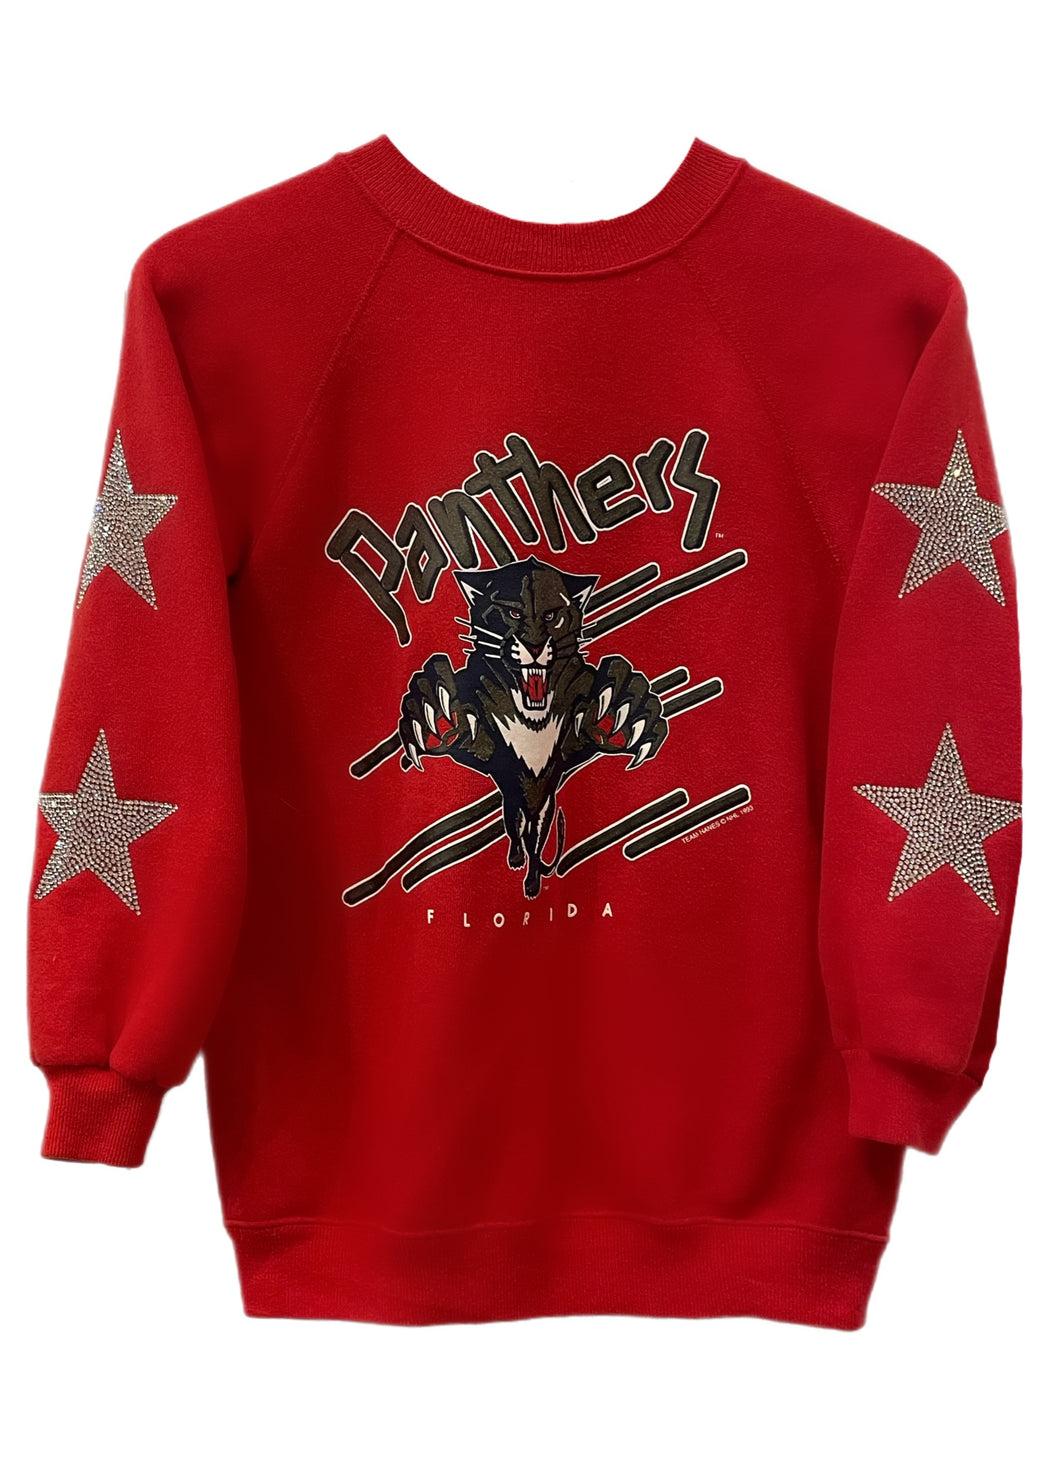 Florida Panthers, NHL One of a KIND Vintage Sweatshirt with Crystal Star Design